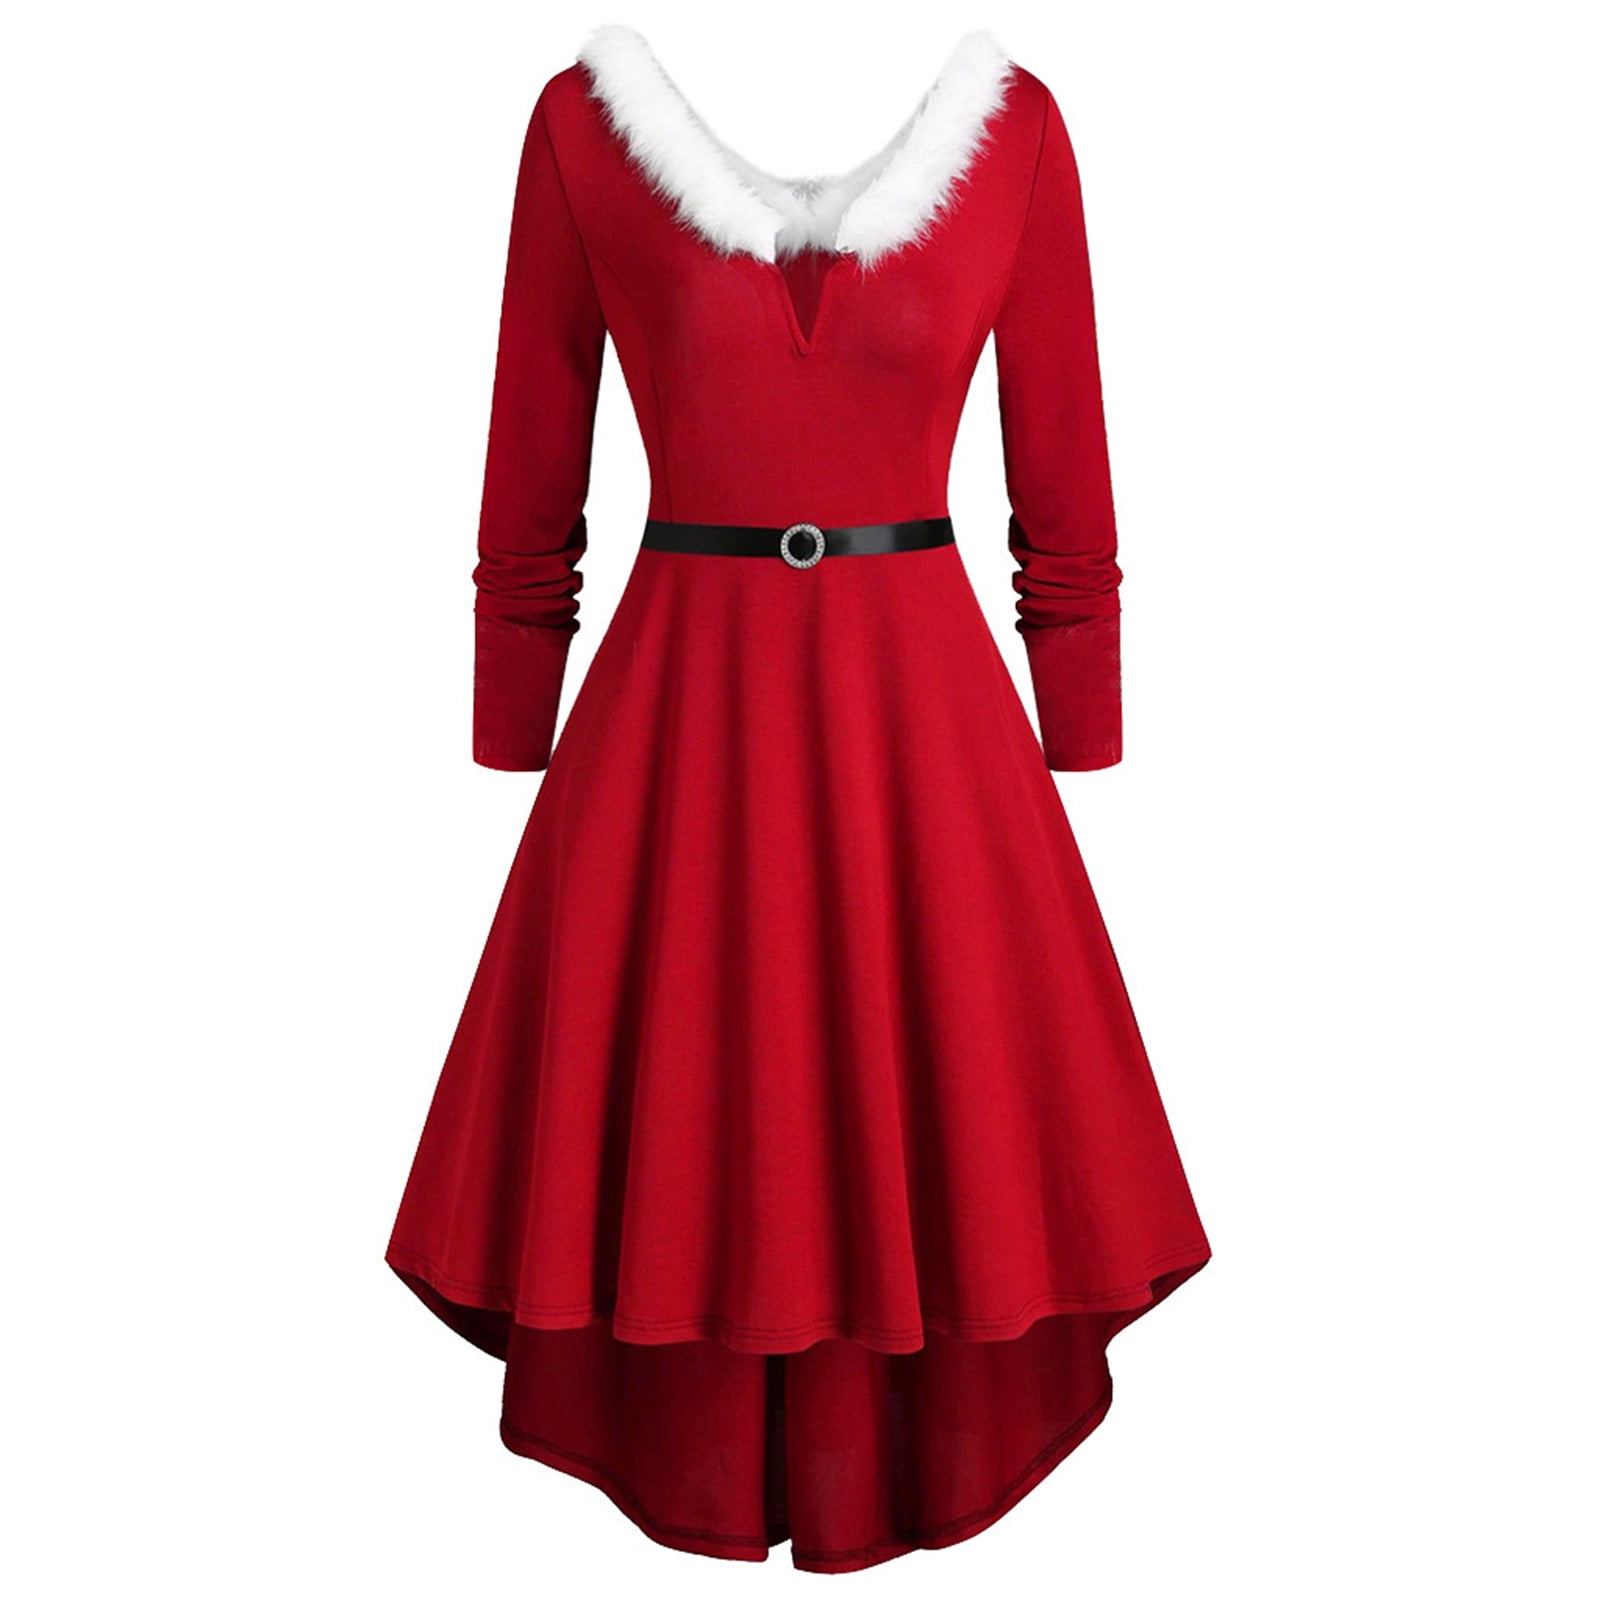 Hnewly Christmas Party Dress Red Dress Women New Belted Snowflake Print  Cold Shoulder Round Neck Dress Plus Size Fashion Ladies | Red dress women, Christmas  party dress, Round neck dresses